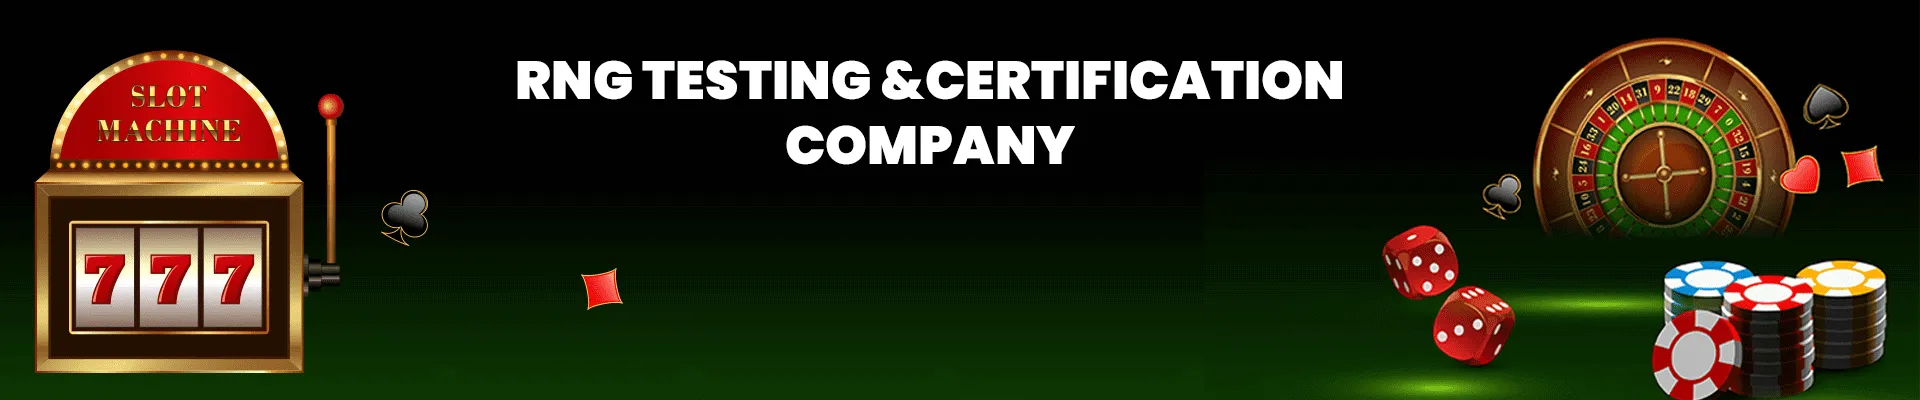 Top RNG Testing & Certification Company | Best RNG Testing & Certification Services (2021)